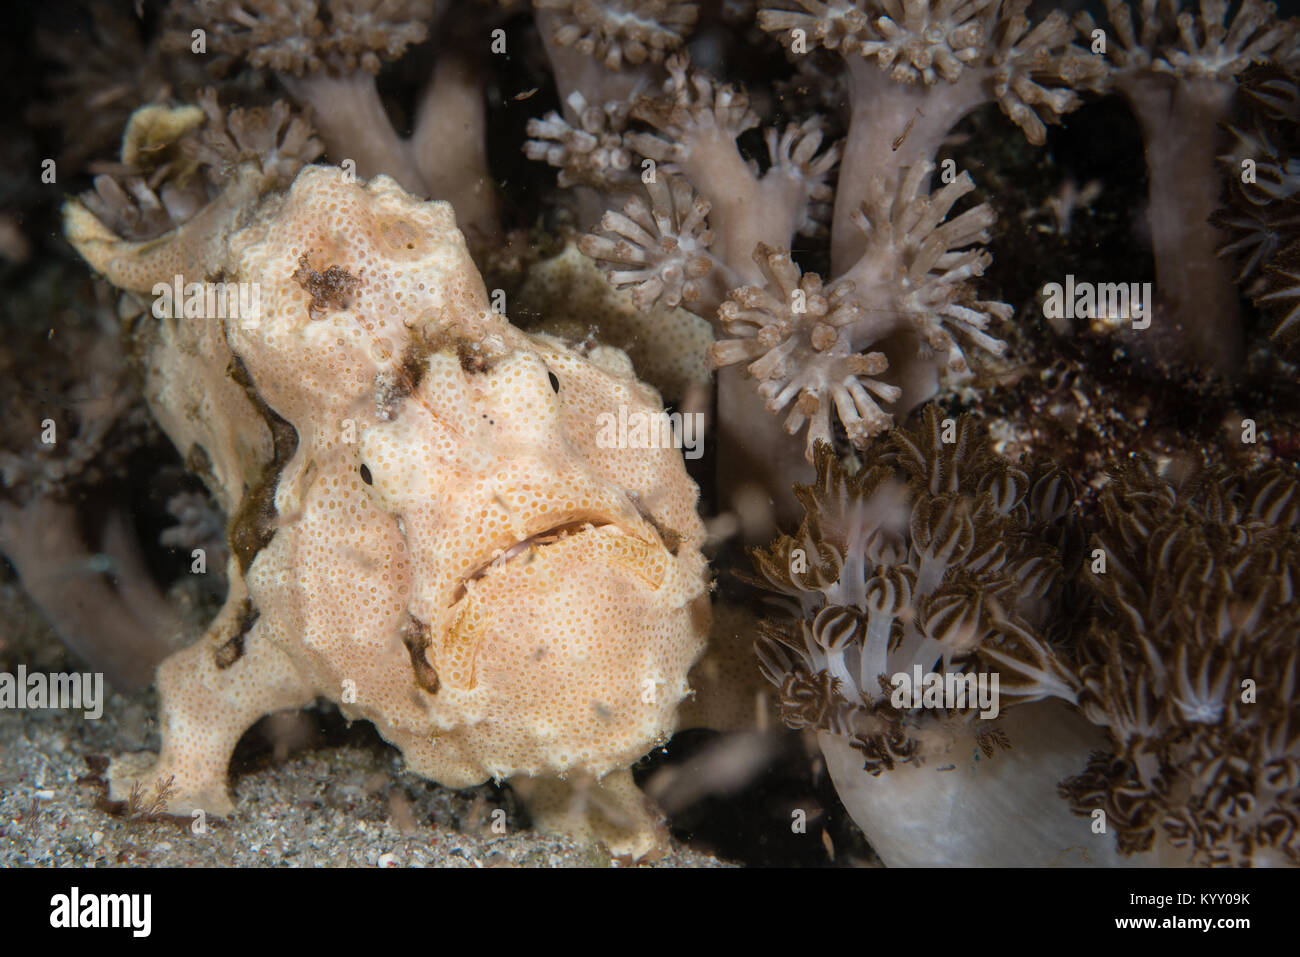 A white warty Antennarius frogfish portrait taken during a night dive in Komodo National Park, Indonesia. Stock Photo